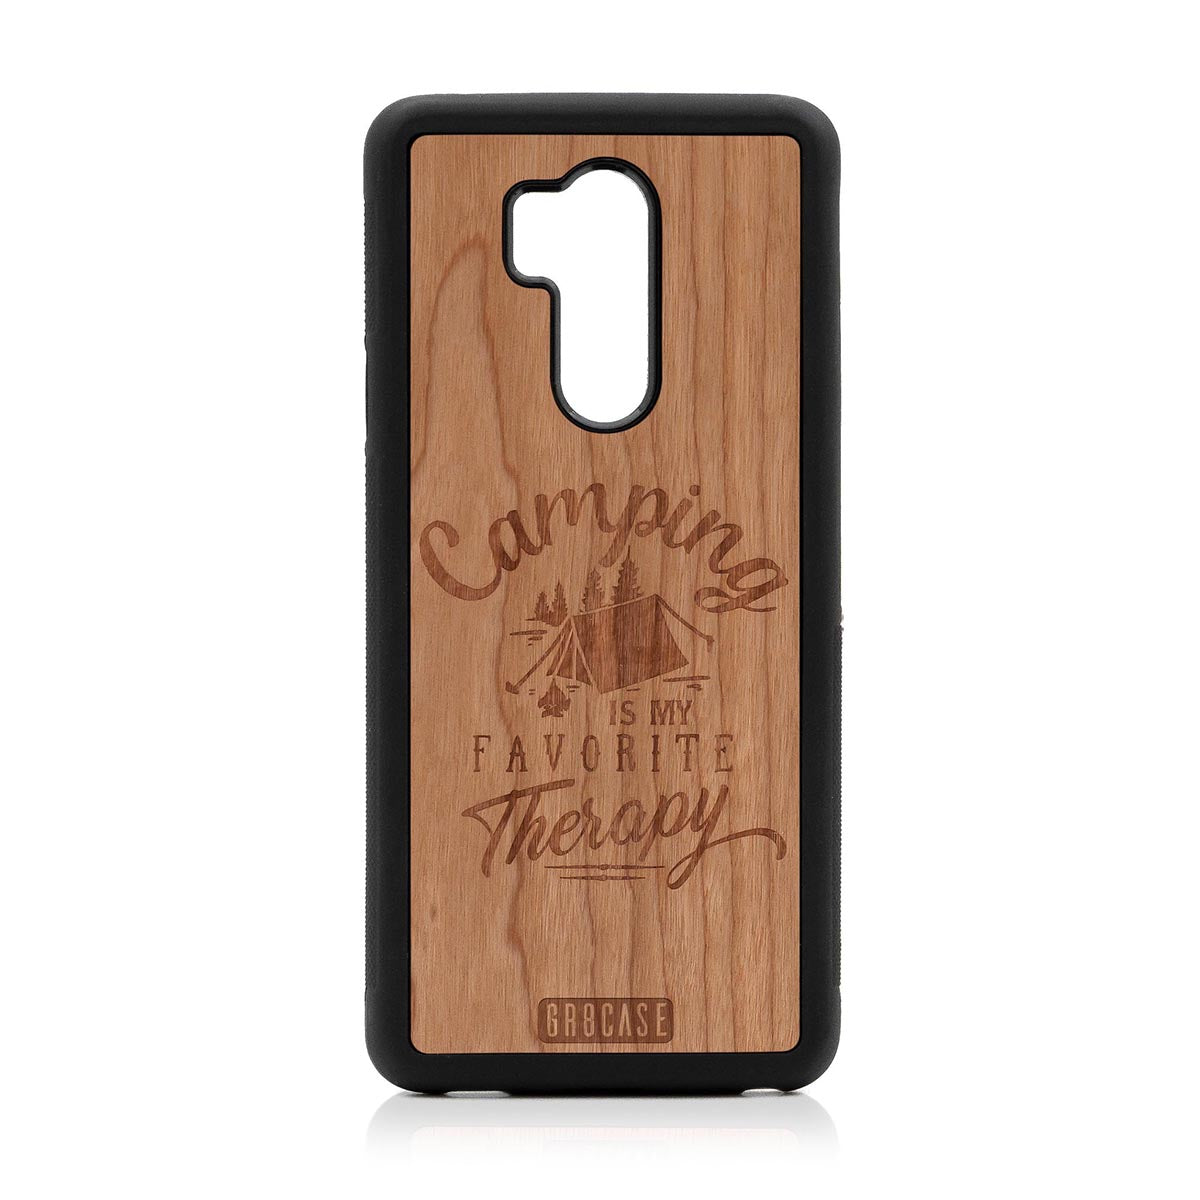 Camping Is My Favorite Therapy Design Wood Case For LG G7 ThinQ by GR8CASE